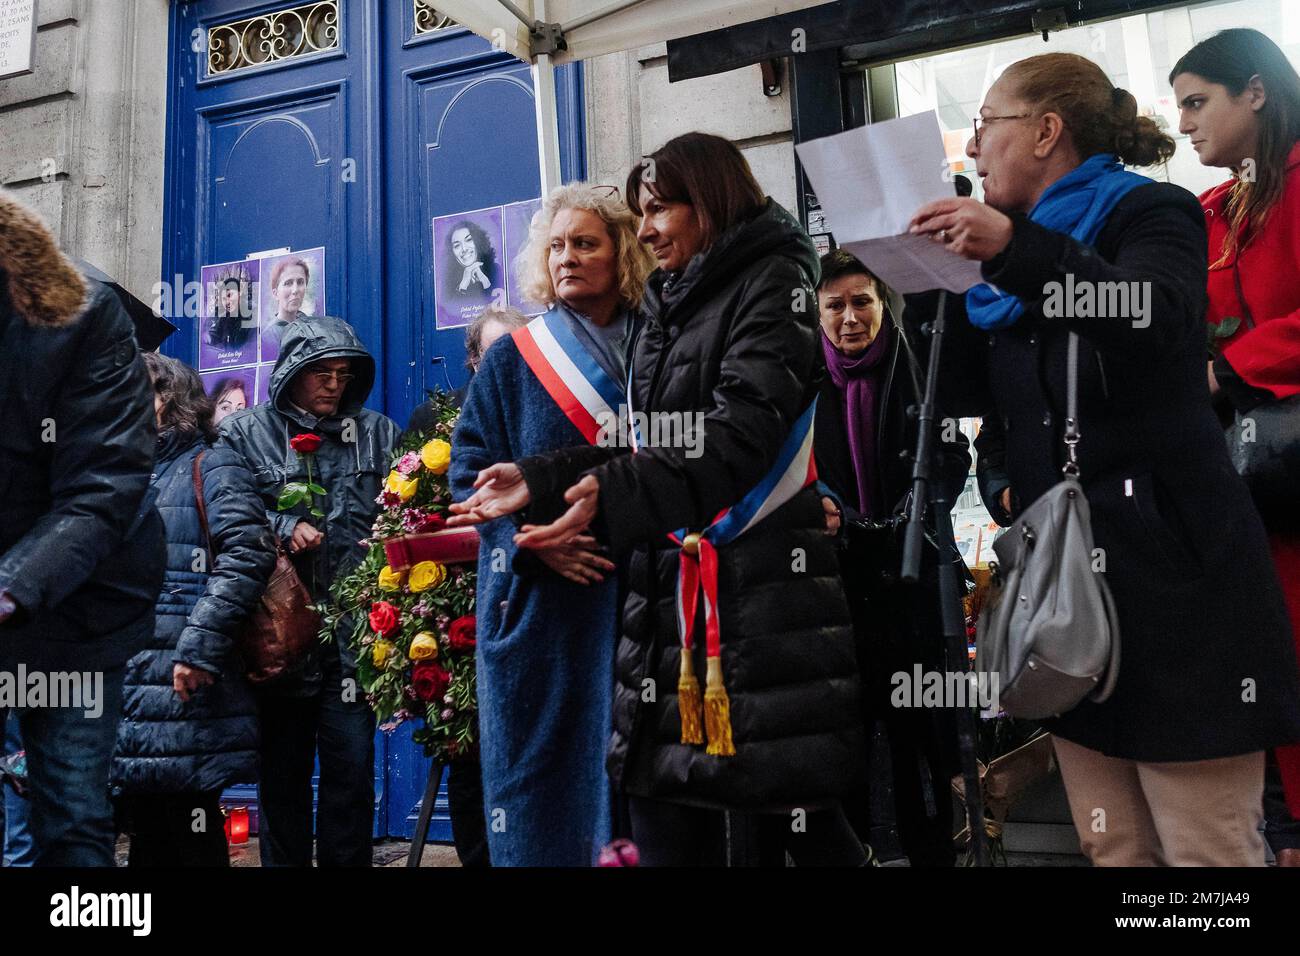 Jan Schmidt-Whitley/Le Pictorium - Commemoration of the 10th anniversary of the murder of 3 Kurdish women activists in Paris in January 2013 - 9/1/2023 - France/Paris/Paris - Anne Hidalgo will lay a wreath in front of the door of 147 rue Lafayette with the mayor of the 10th arrondissement, Alexandra Cordebard (left) and Berivan Firat, spokesperson for external relations of the Kurdish Democratic Council in France (CDKF). Several dozen Kurdish activists and their supporters gathered in front of 147 rue Lafayette to pay tribute to the three Kurdish activists murdered on 9 January 2013. Stock Photo